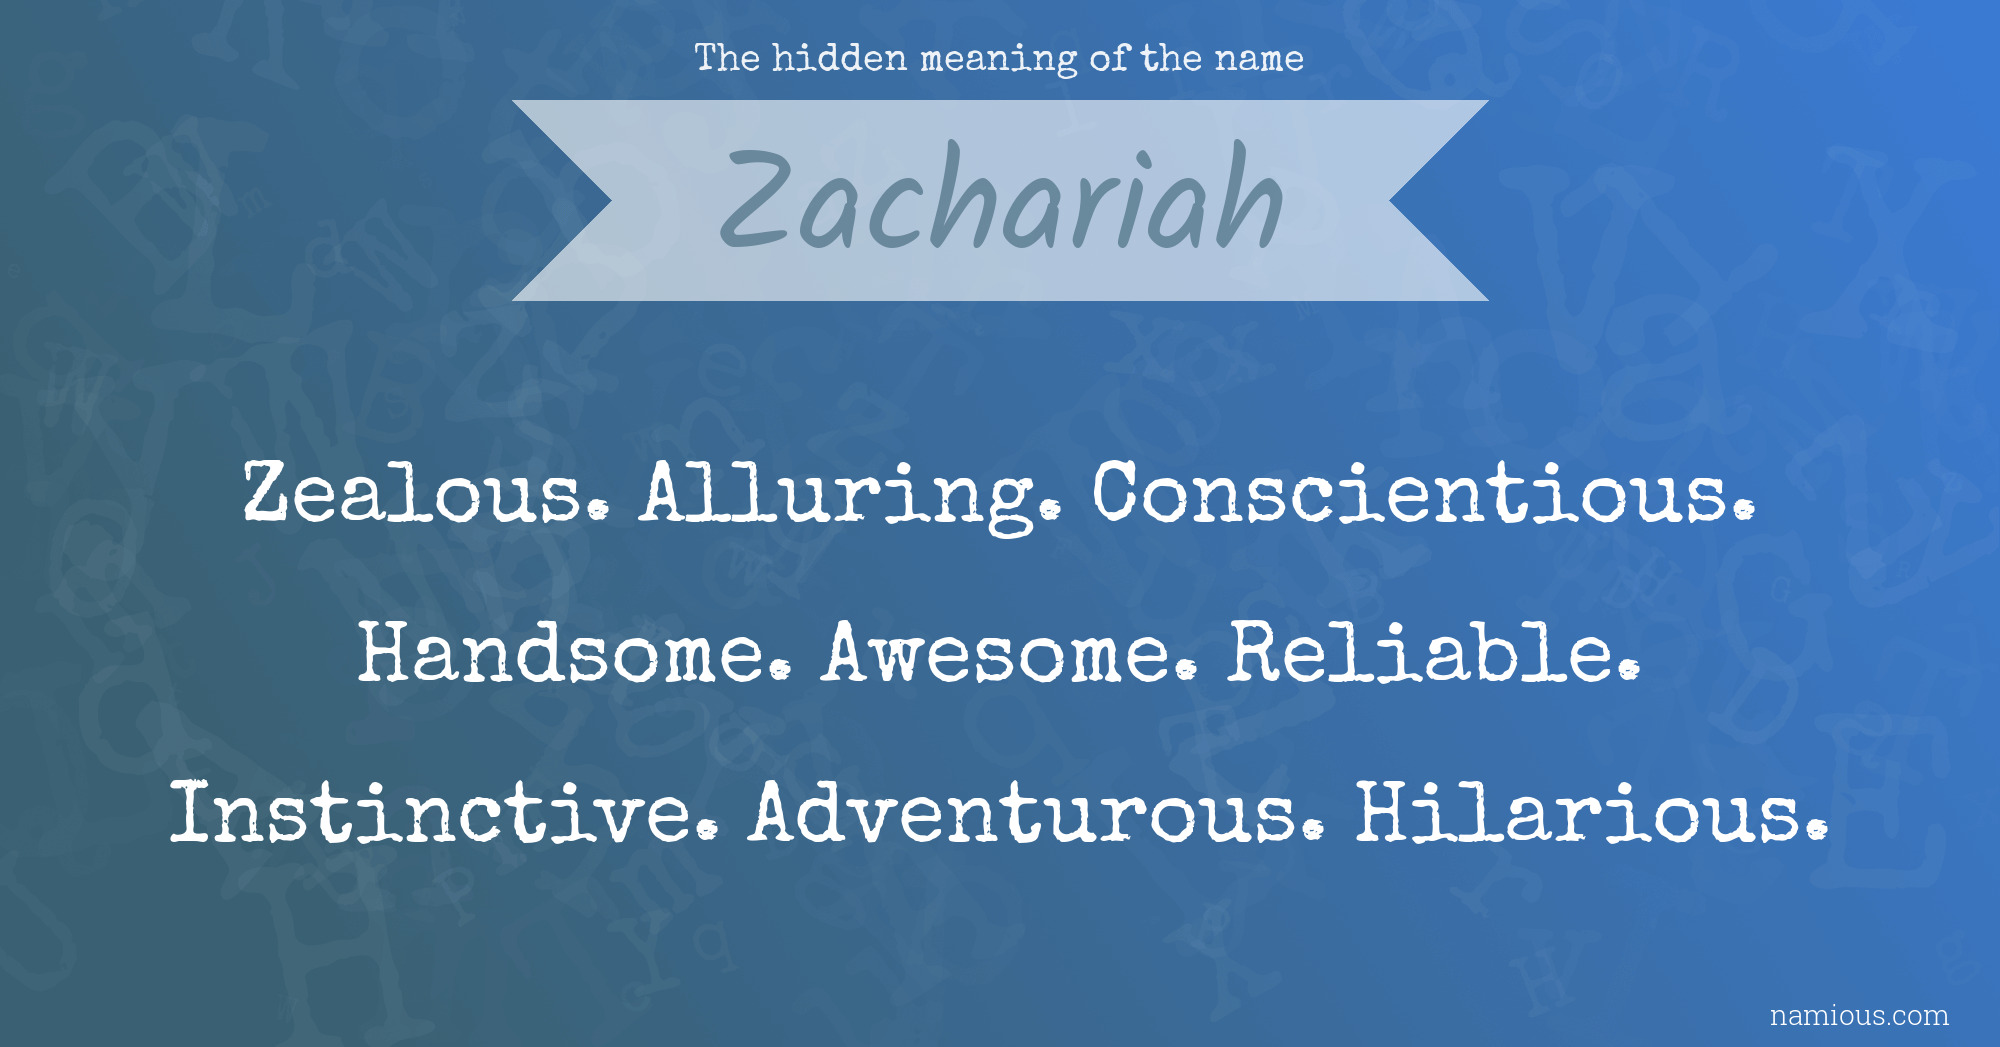 The hidden meaning of the name Zachariah